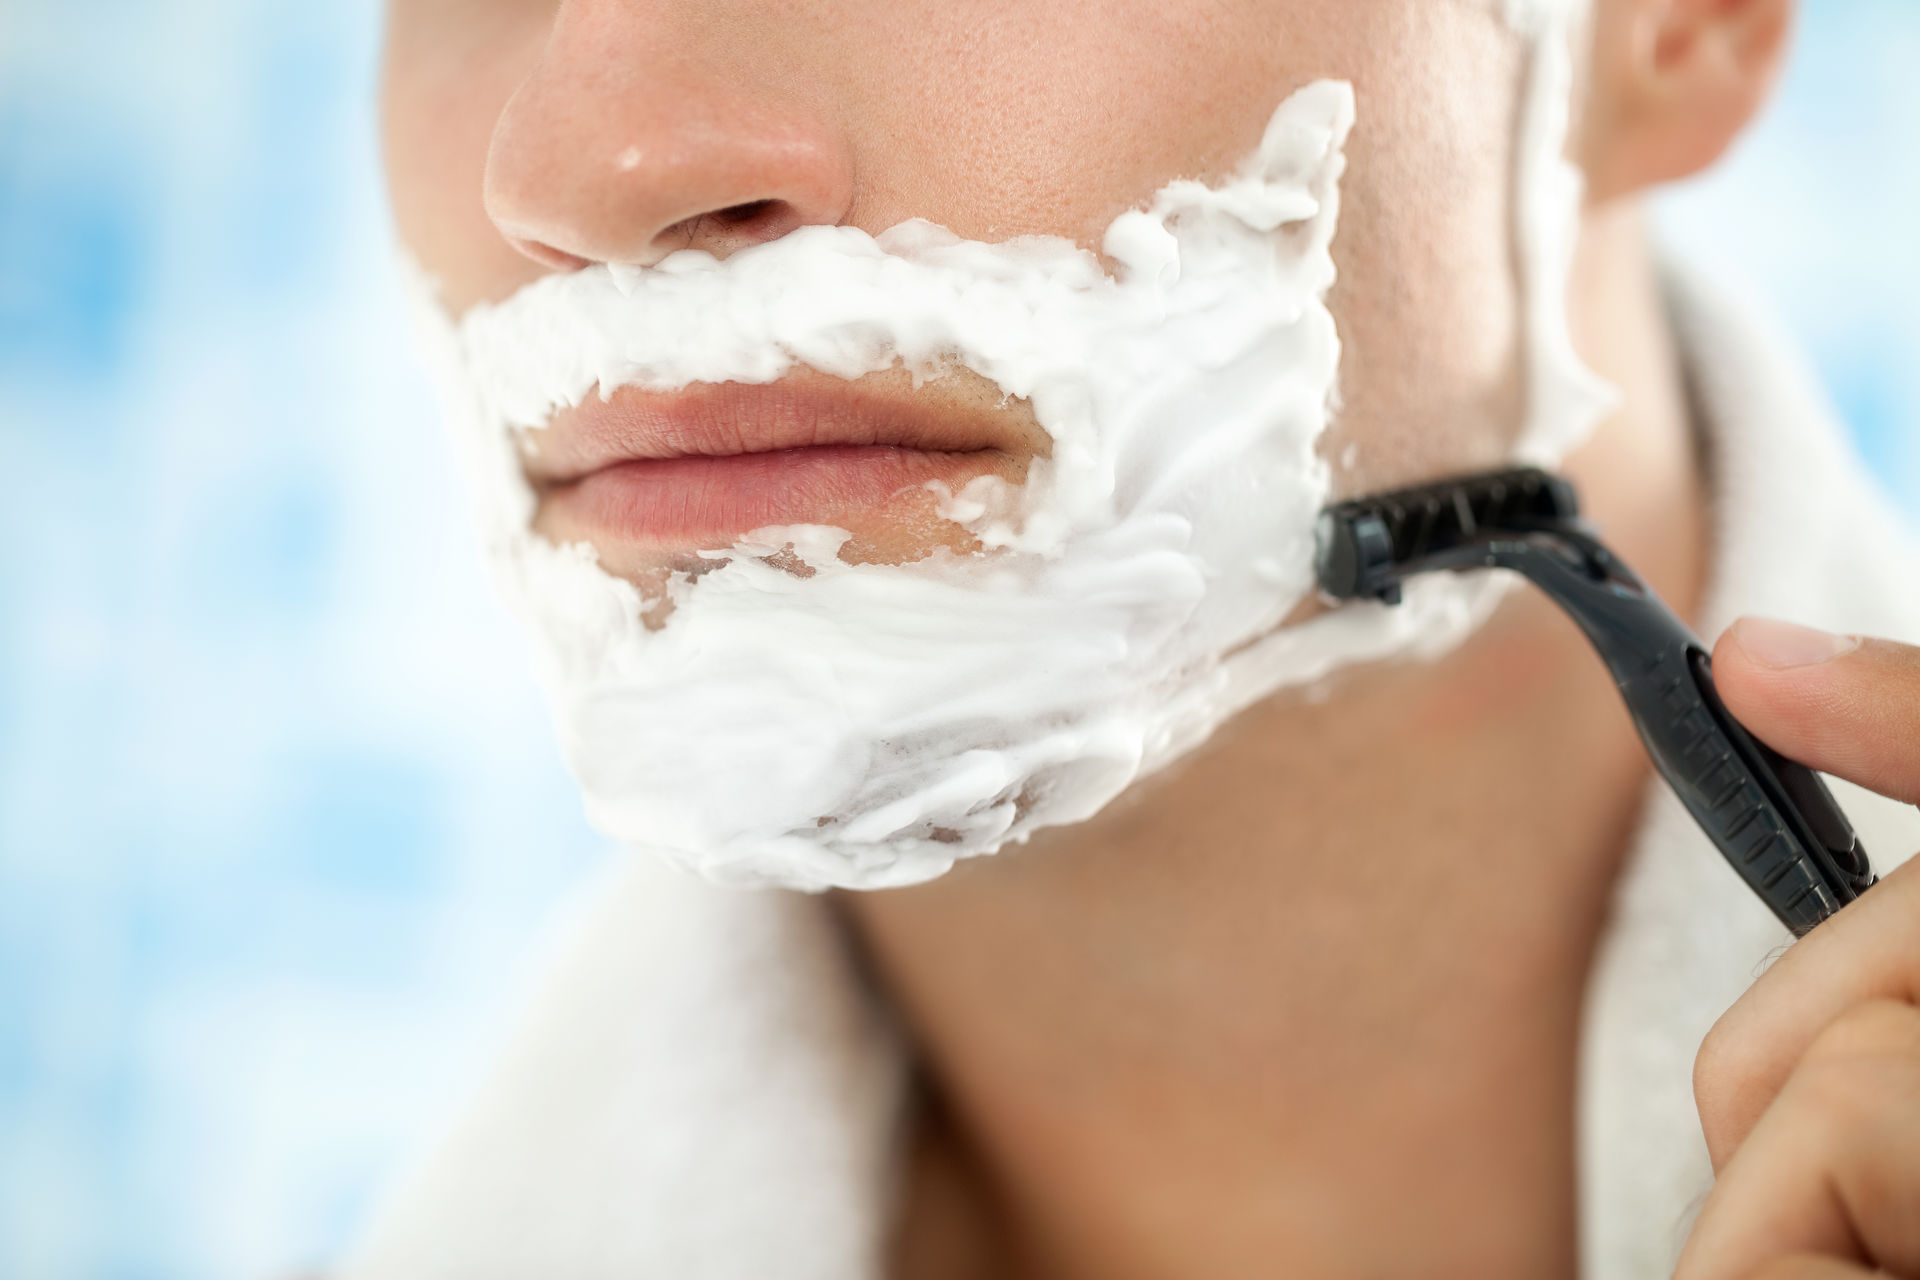 Male shaving facial hair with razor and shaving cream on face